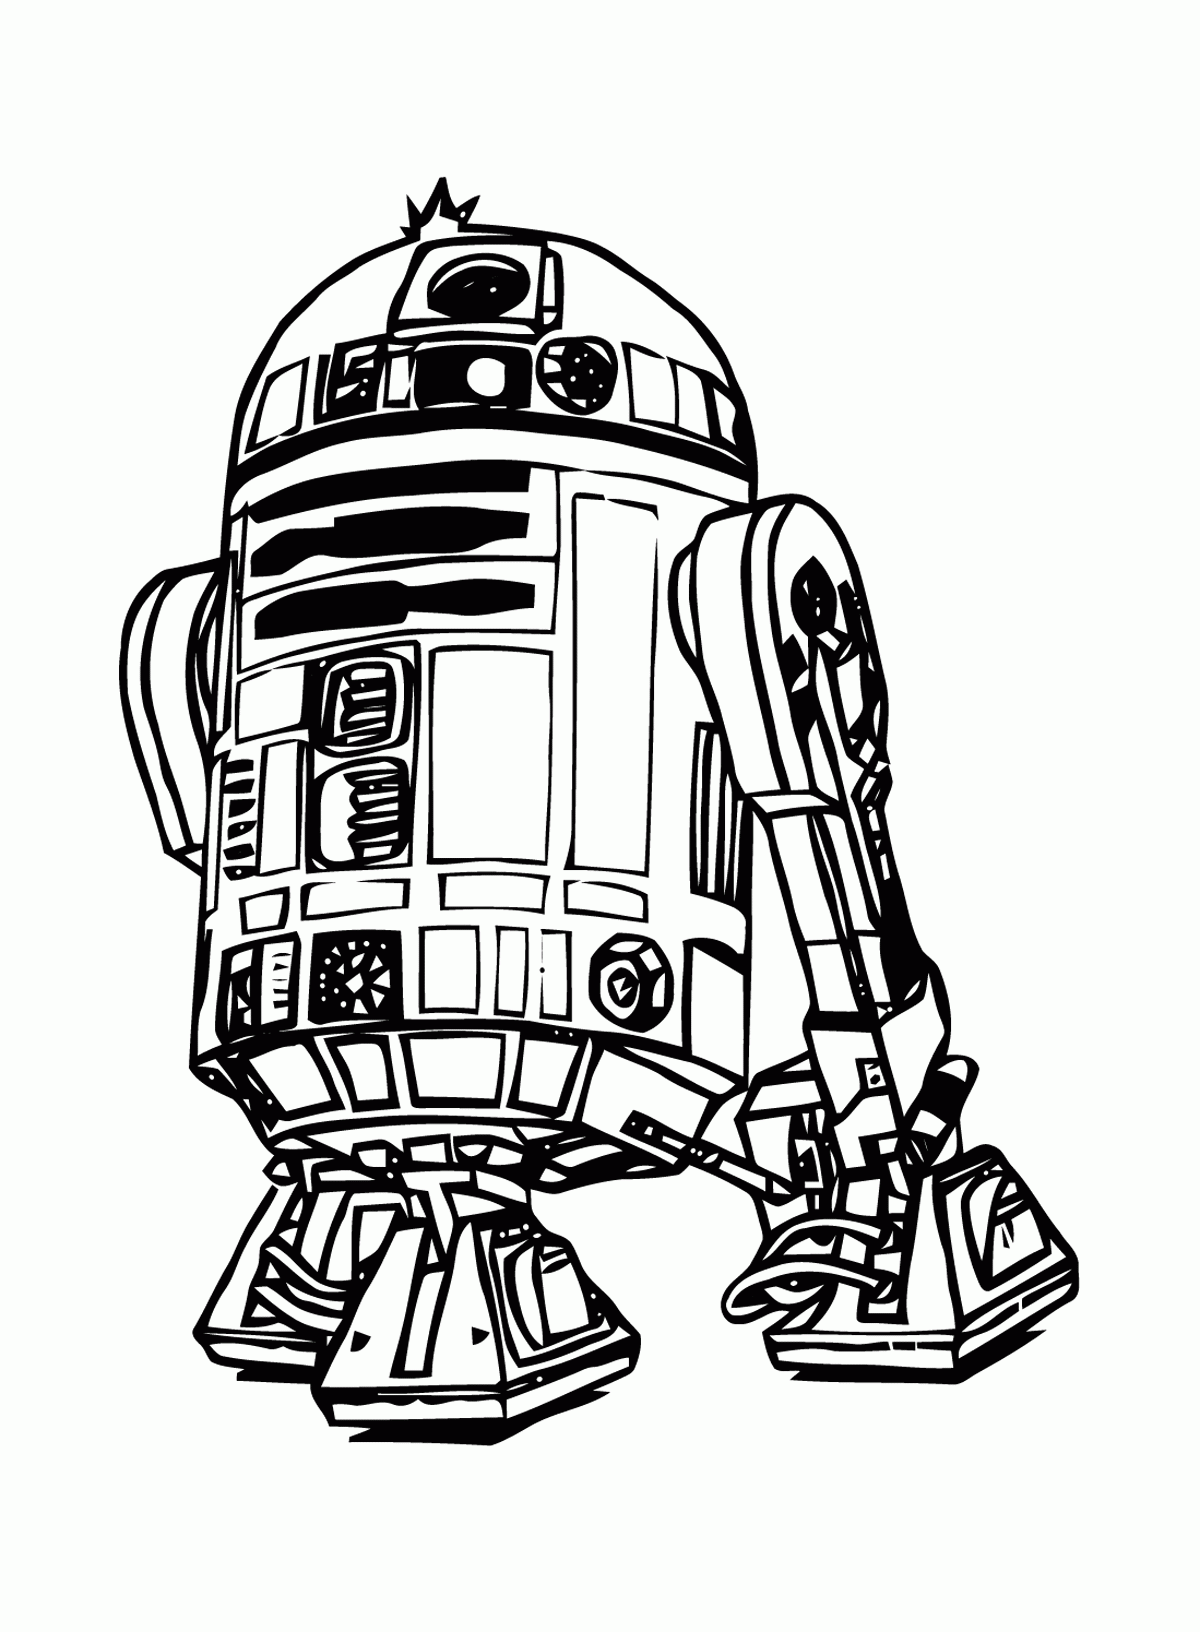 coloriage-star-wars-9_jpg dans Star wars coloring pages | Coloring ...